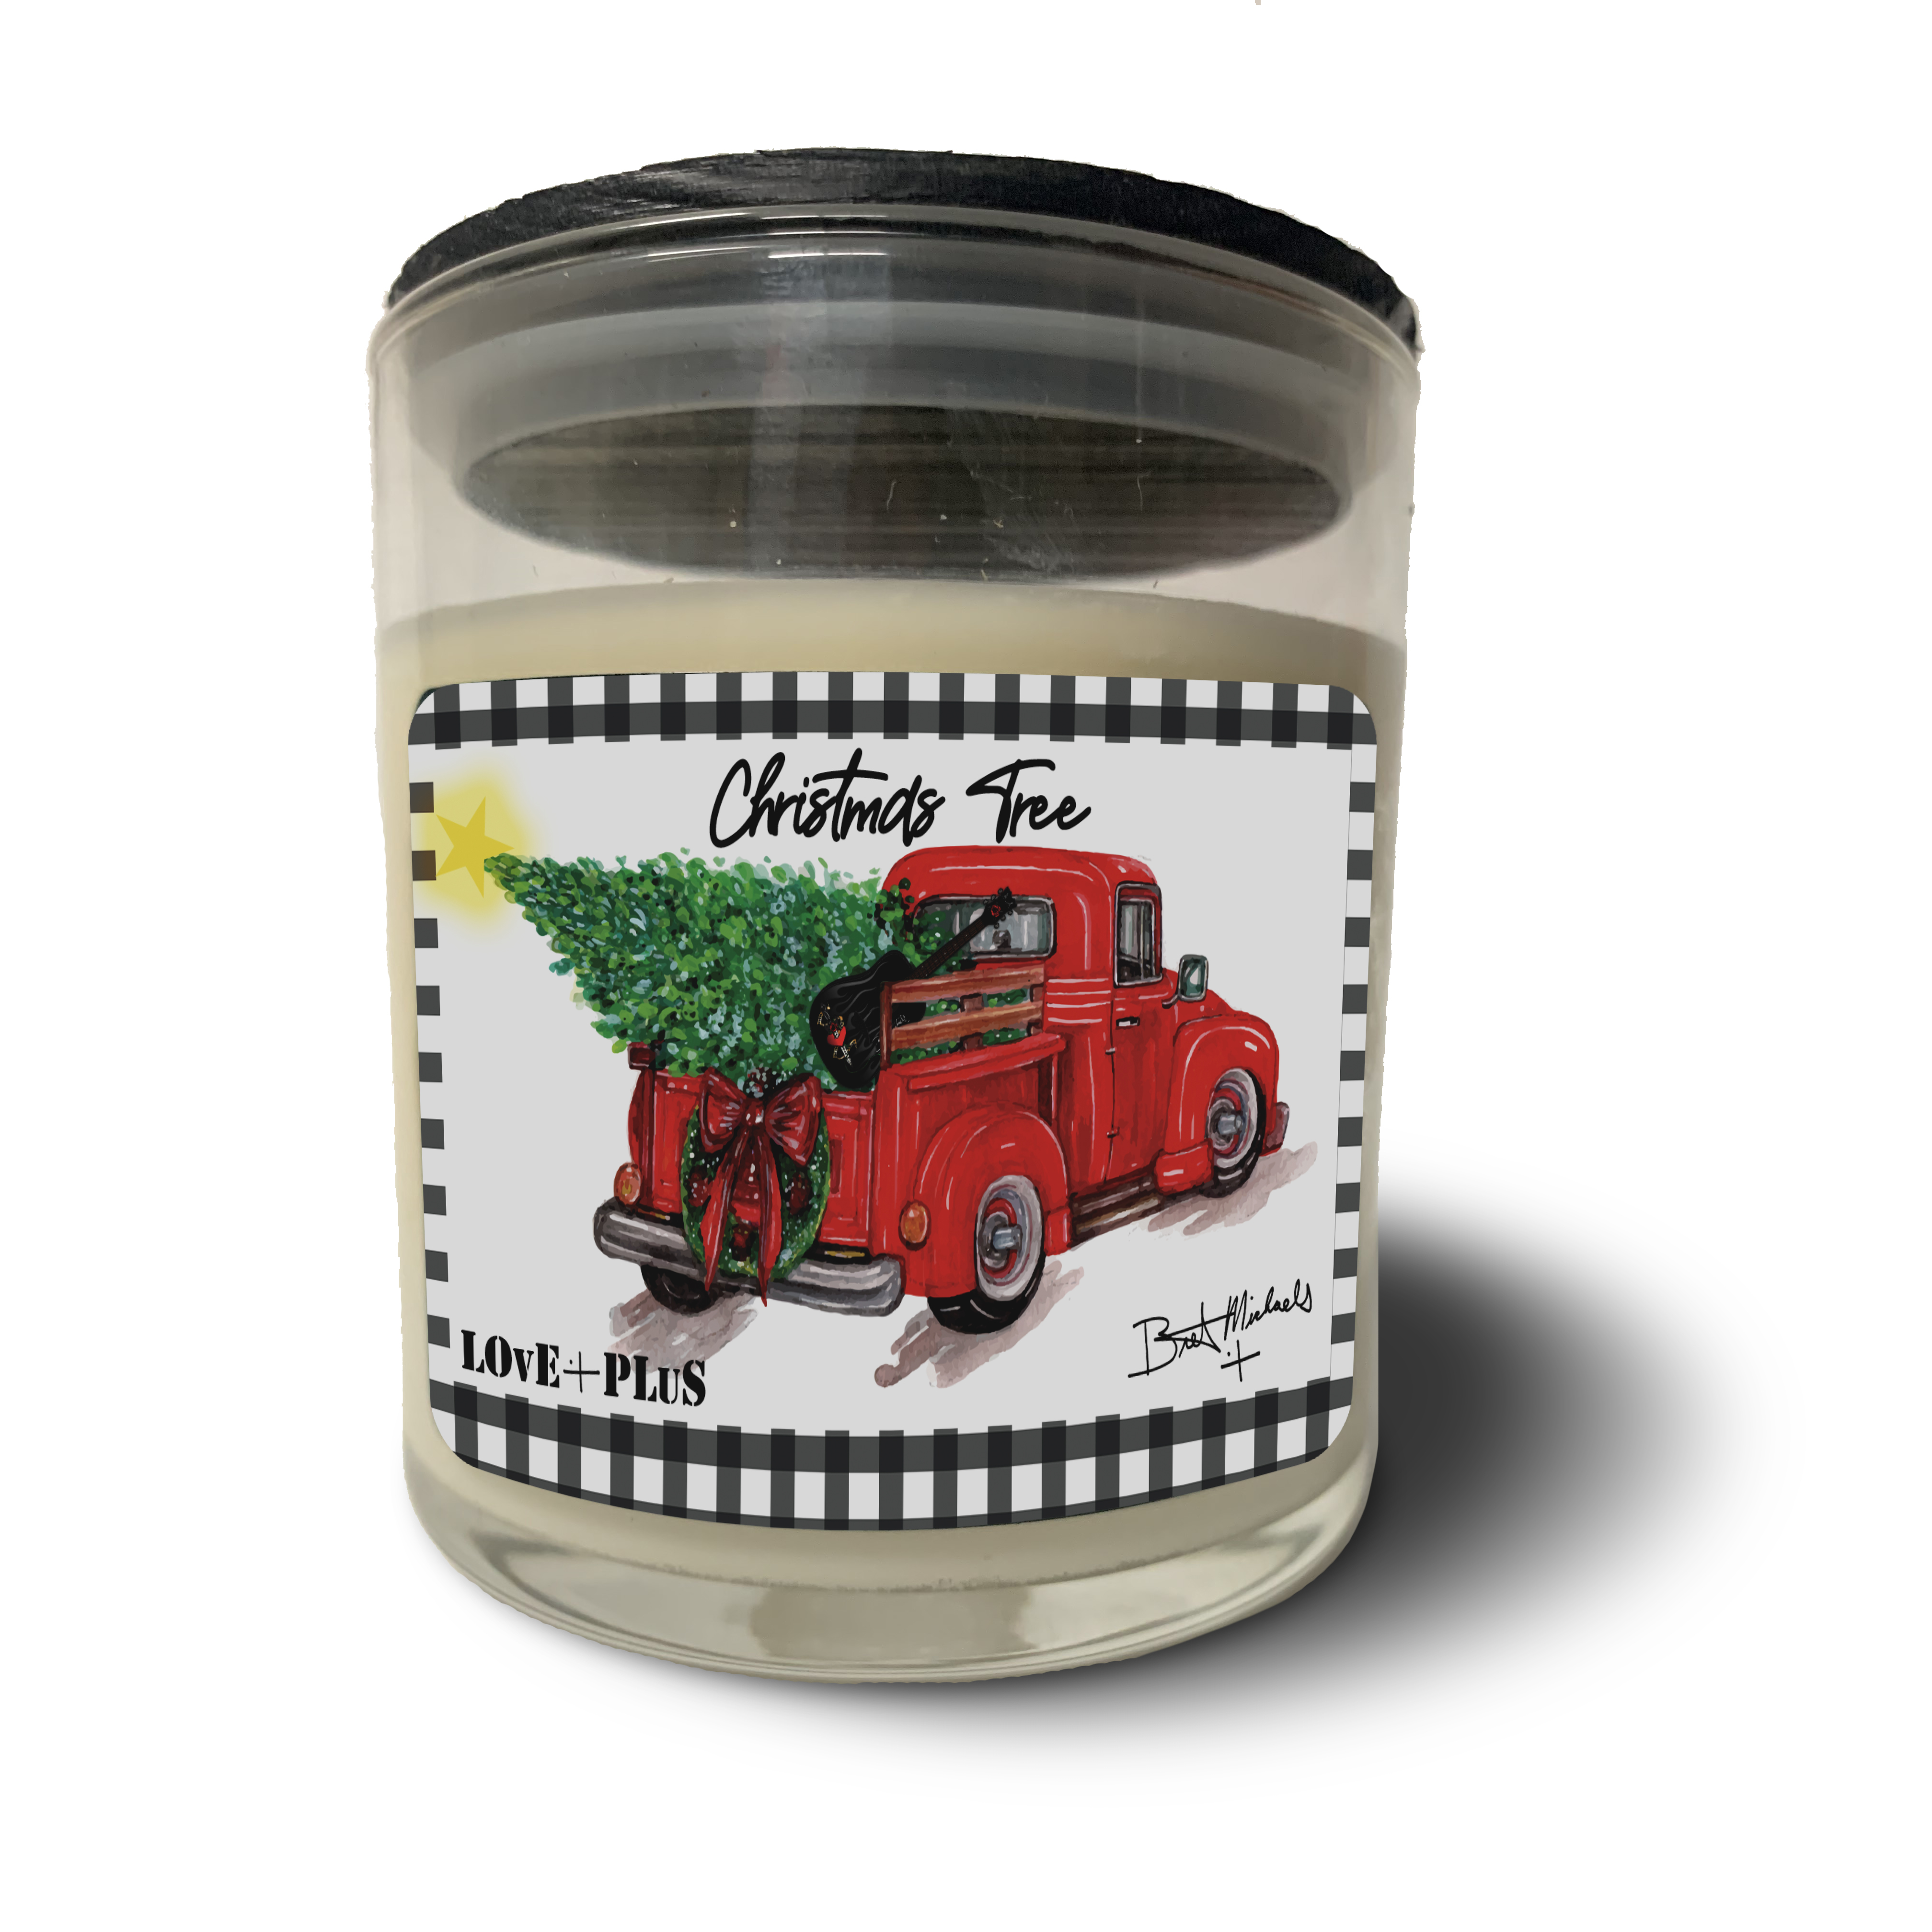 Christmas Tree LOvE+PLuS Candle Jar Bret Michaels, Brett Michaels, Bret Micheals, Brett Micheals, LIfestyle, Style, Life, Collection, Home, Inspiration, gifts, candle, LOVE+PLUS, fraser fir, christmas tree